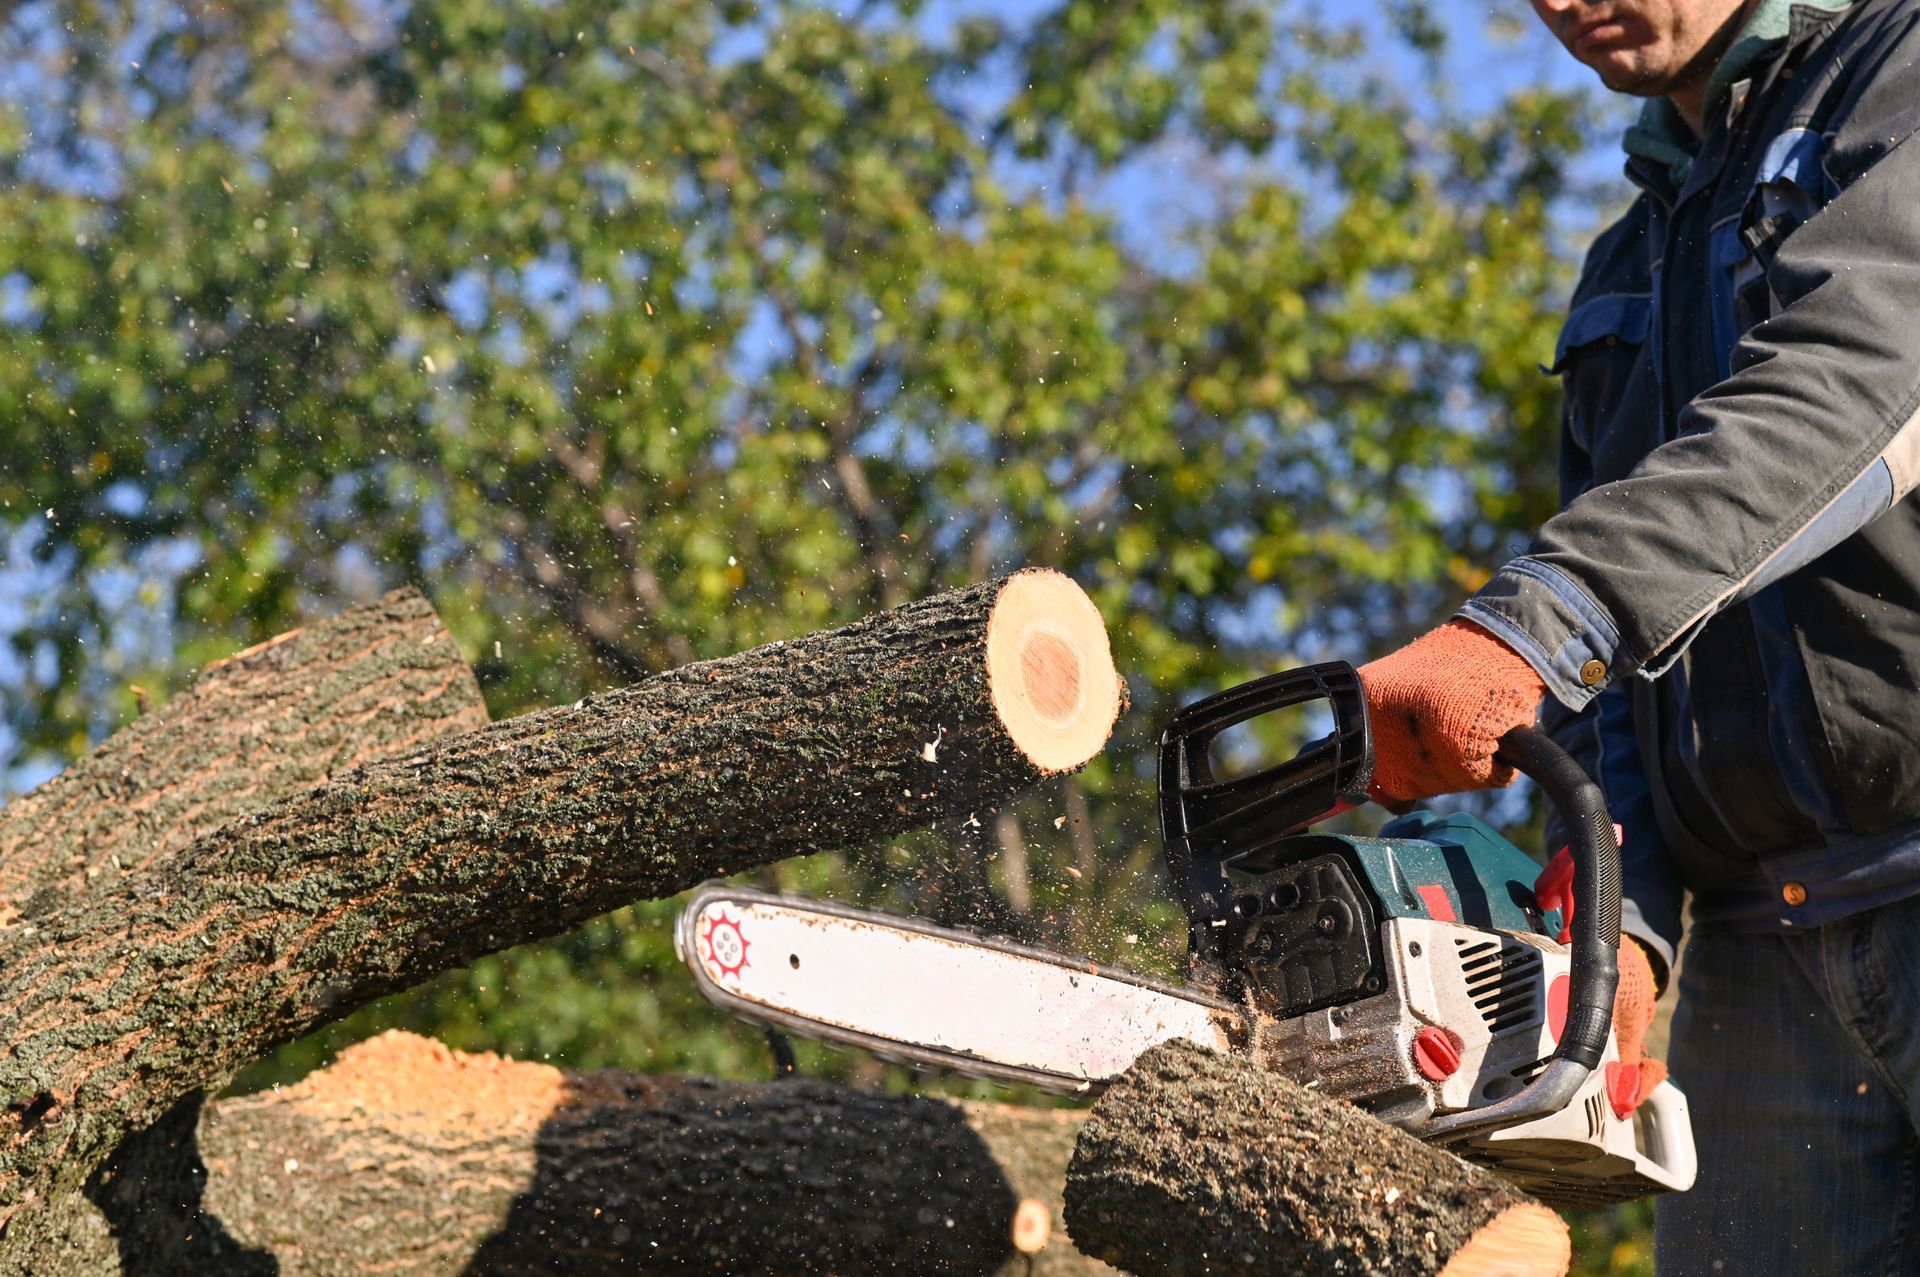 The man sawed off a log with a chainsaw